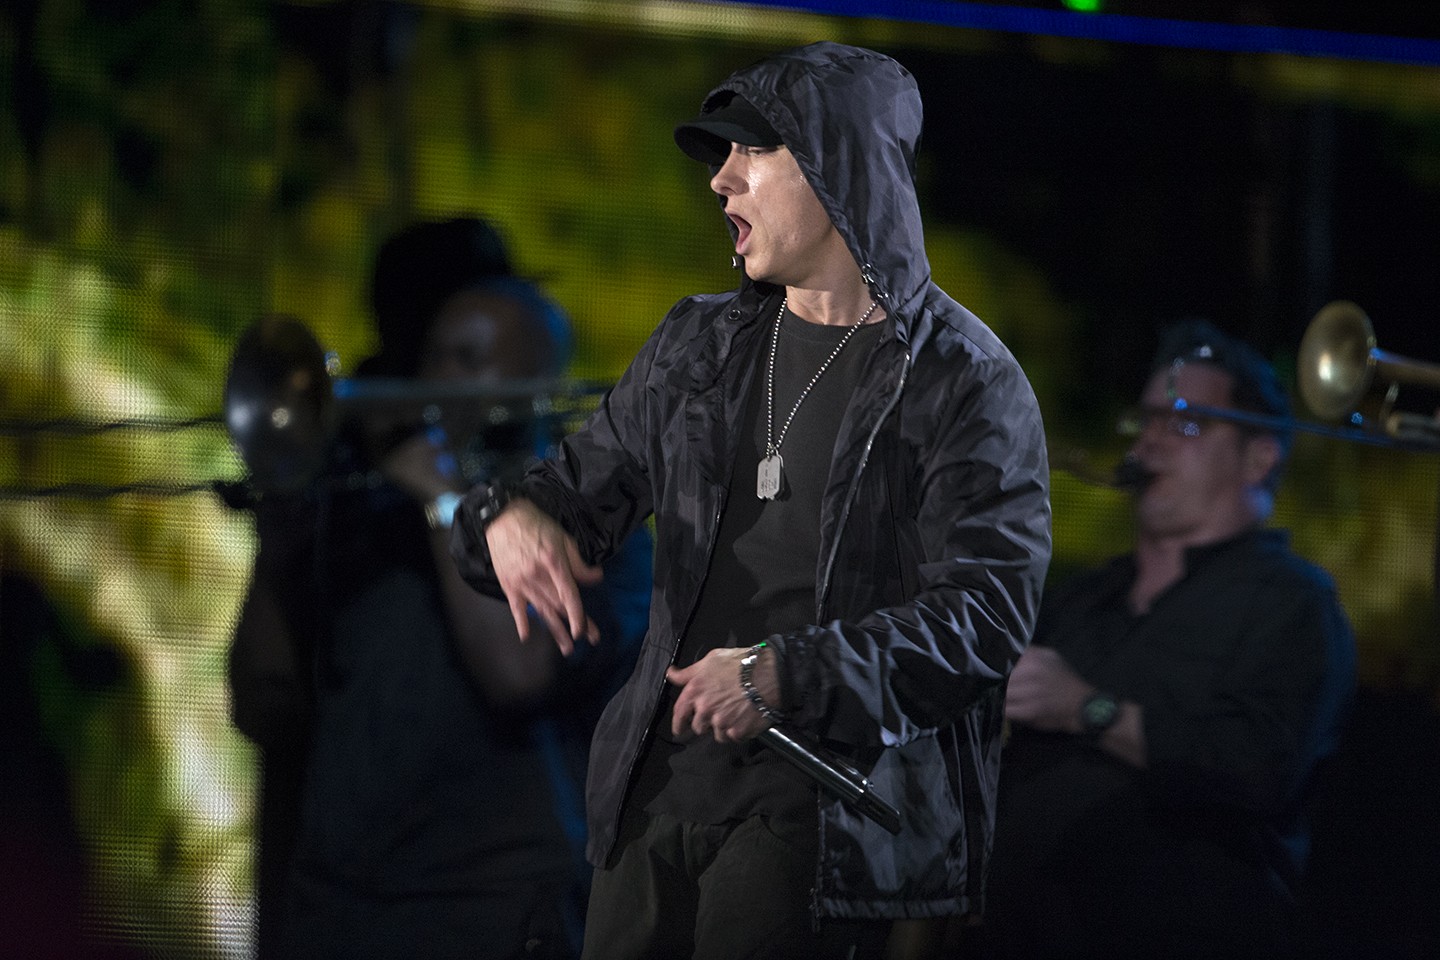 Eminem rapping with a live band during The Concert for Valor in Washington, DC